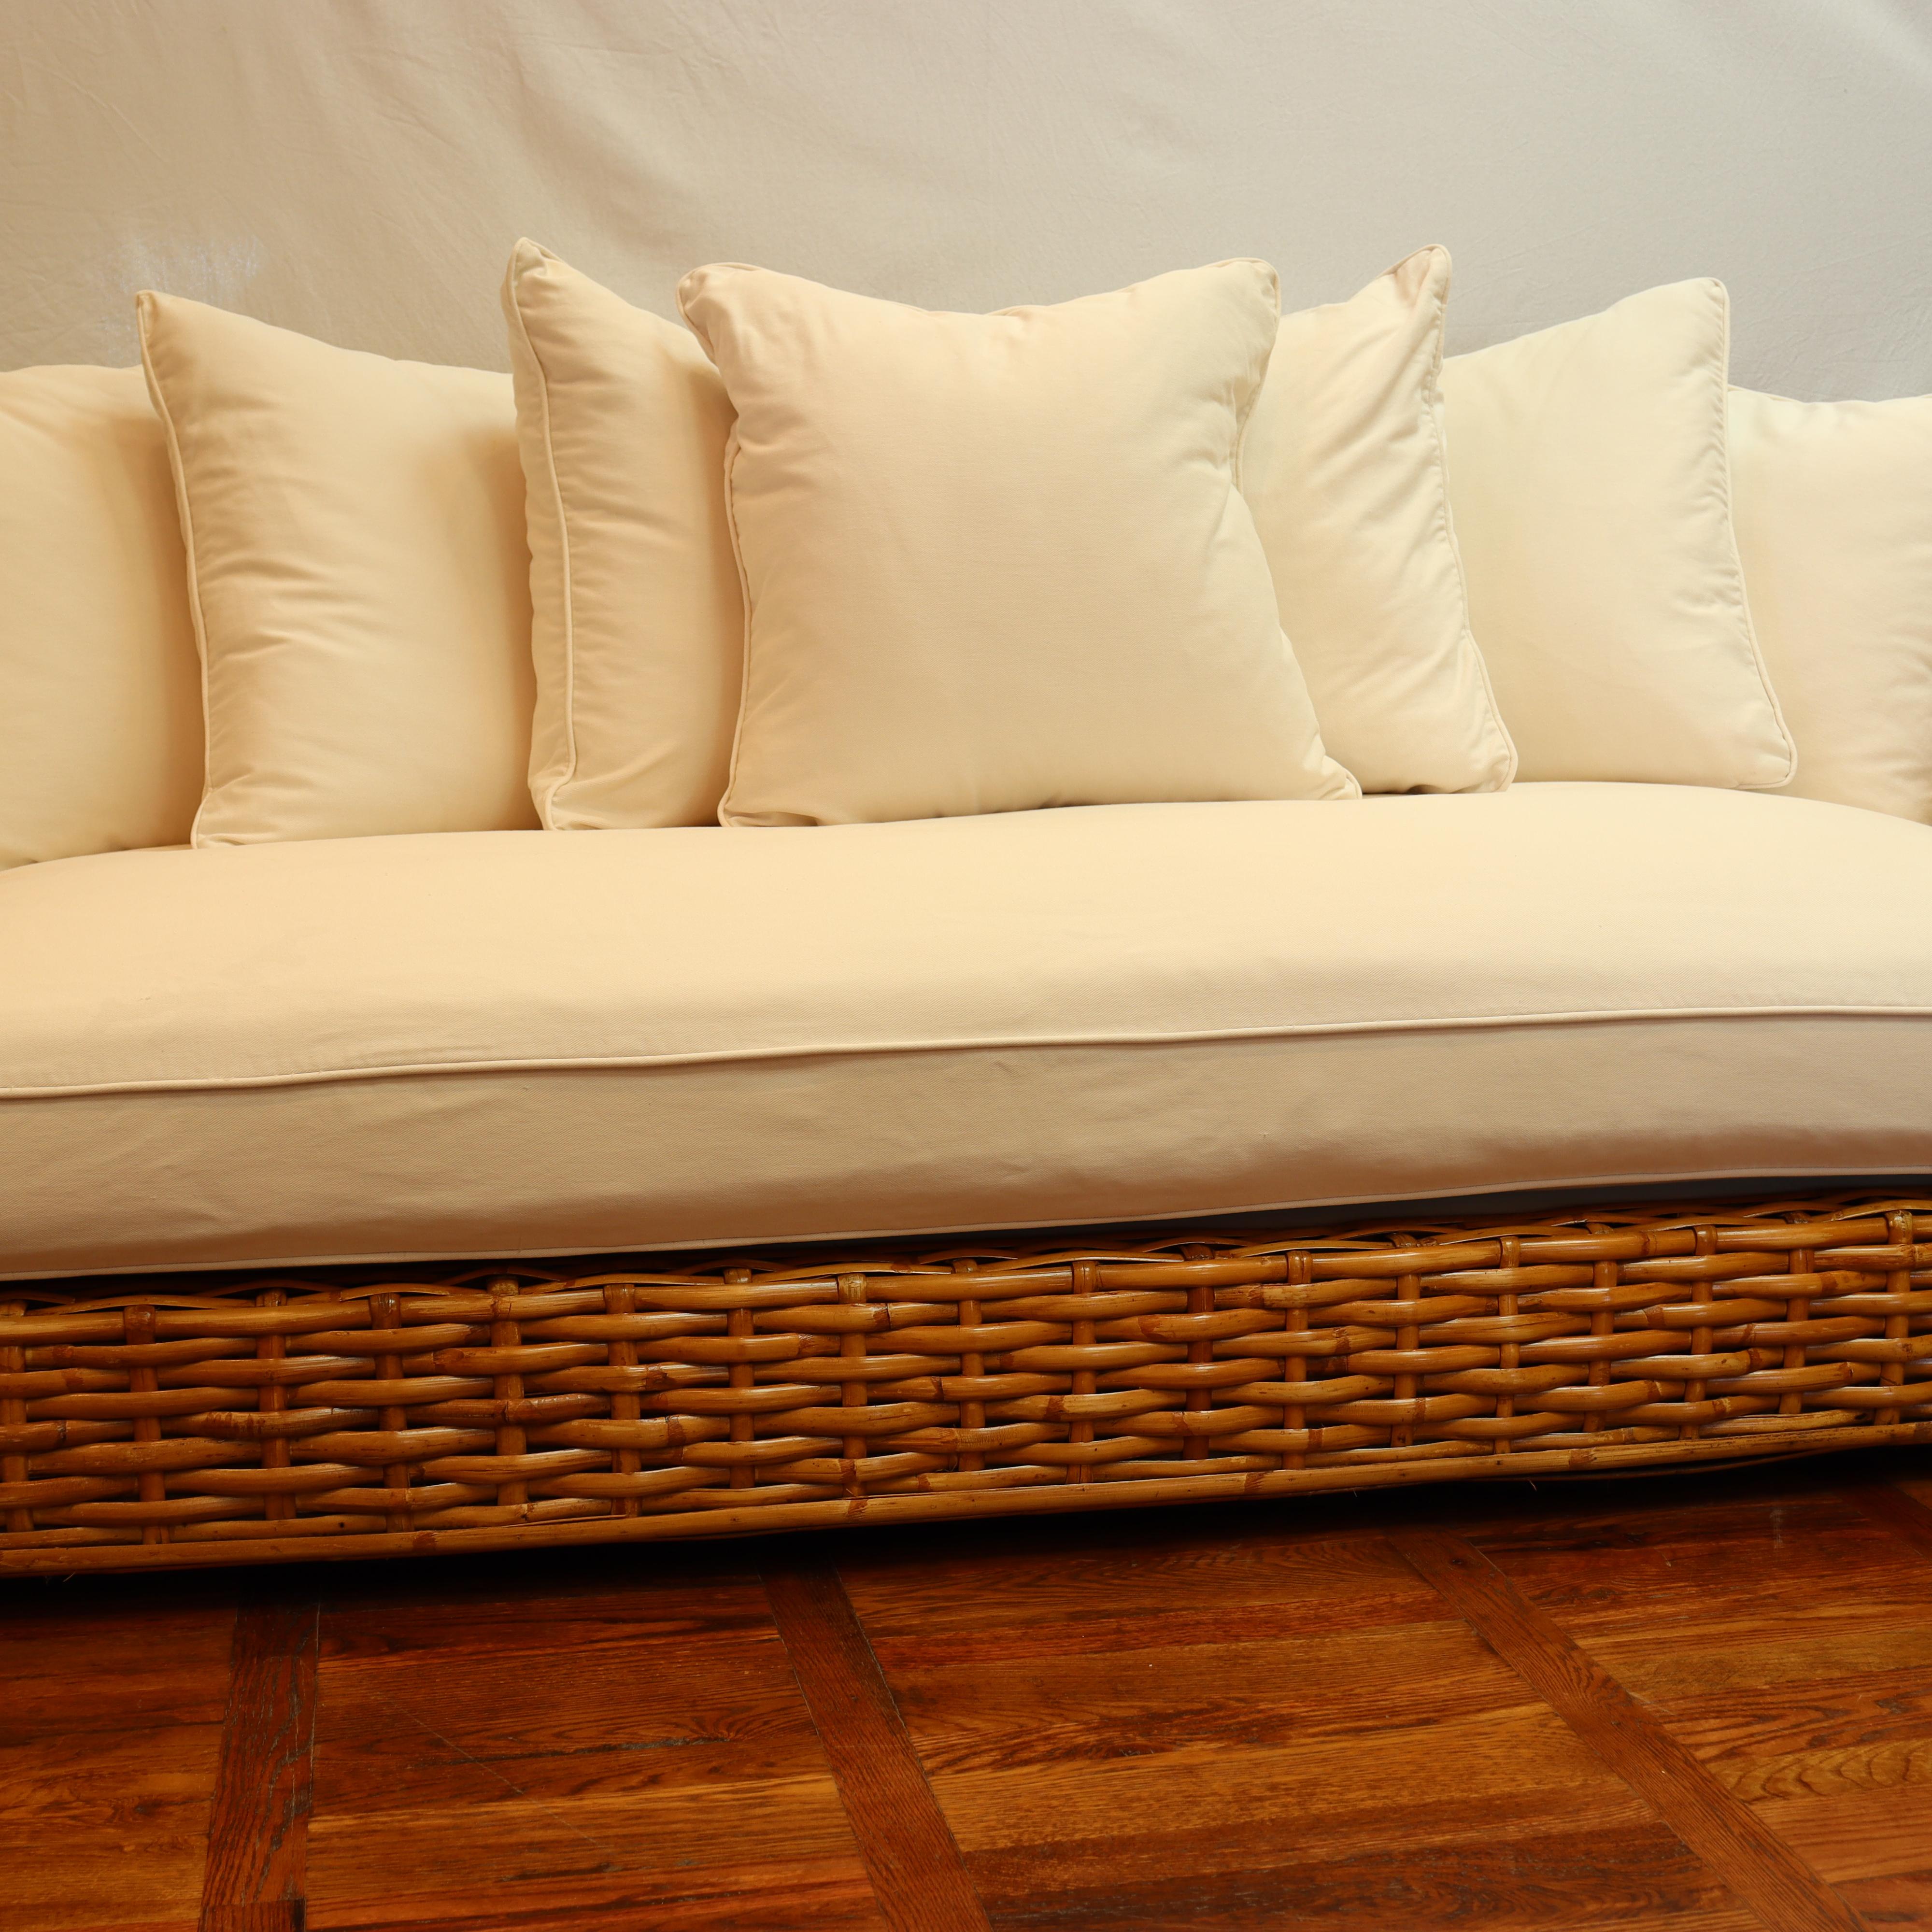 Quality Made Circa 2007 Restoration Hardware woven rattan sofa with down filled white cotton upholstered cushions. Seat cushion constructed with a down envelope surrounding a foam core. Back cushions are all down filled. Both the woven rattan frame